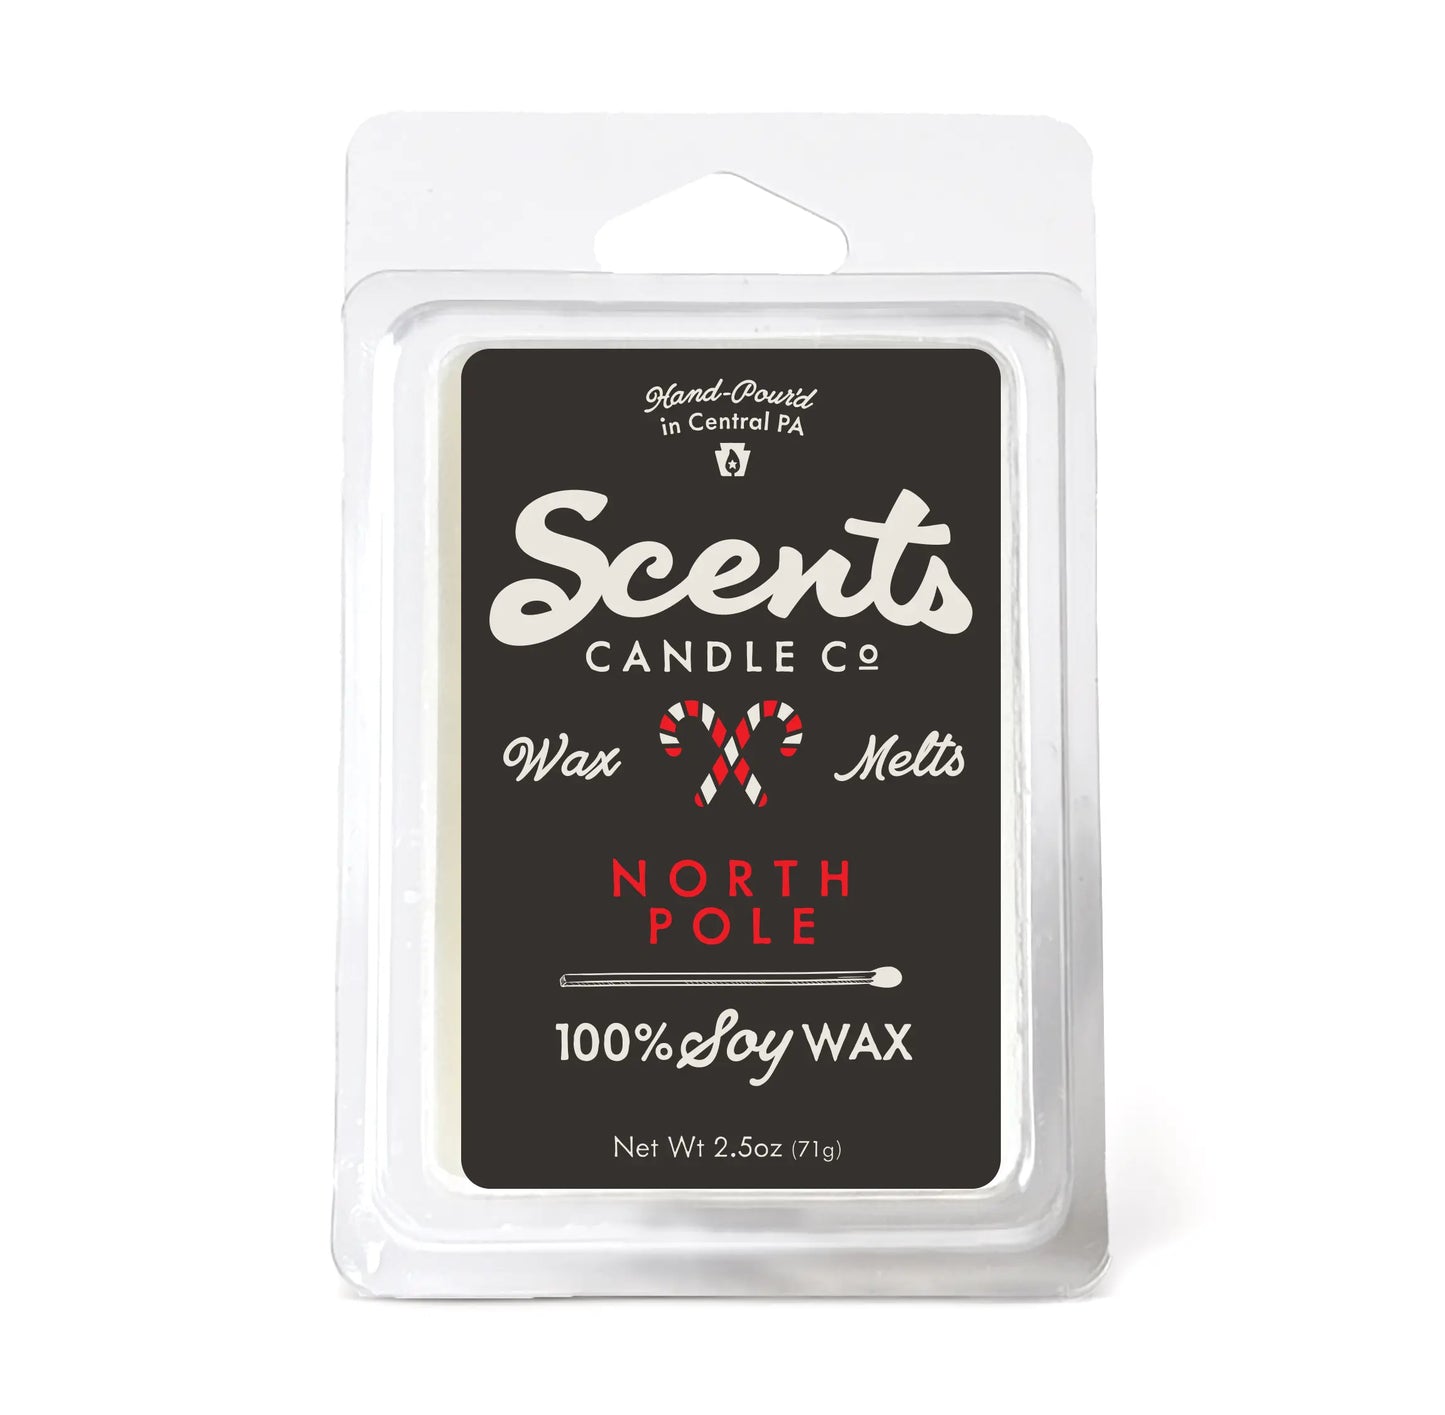 Scents Candle Co. North Pole Wax Melt